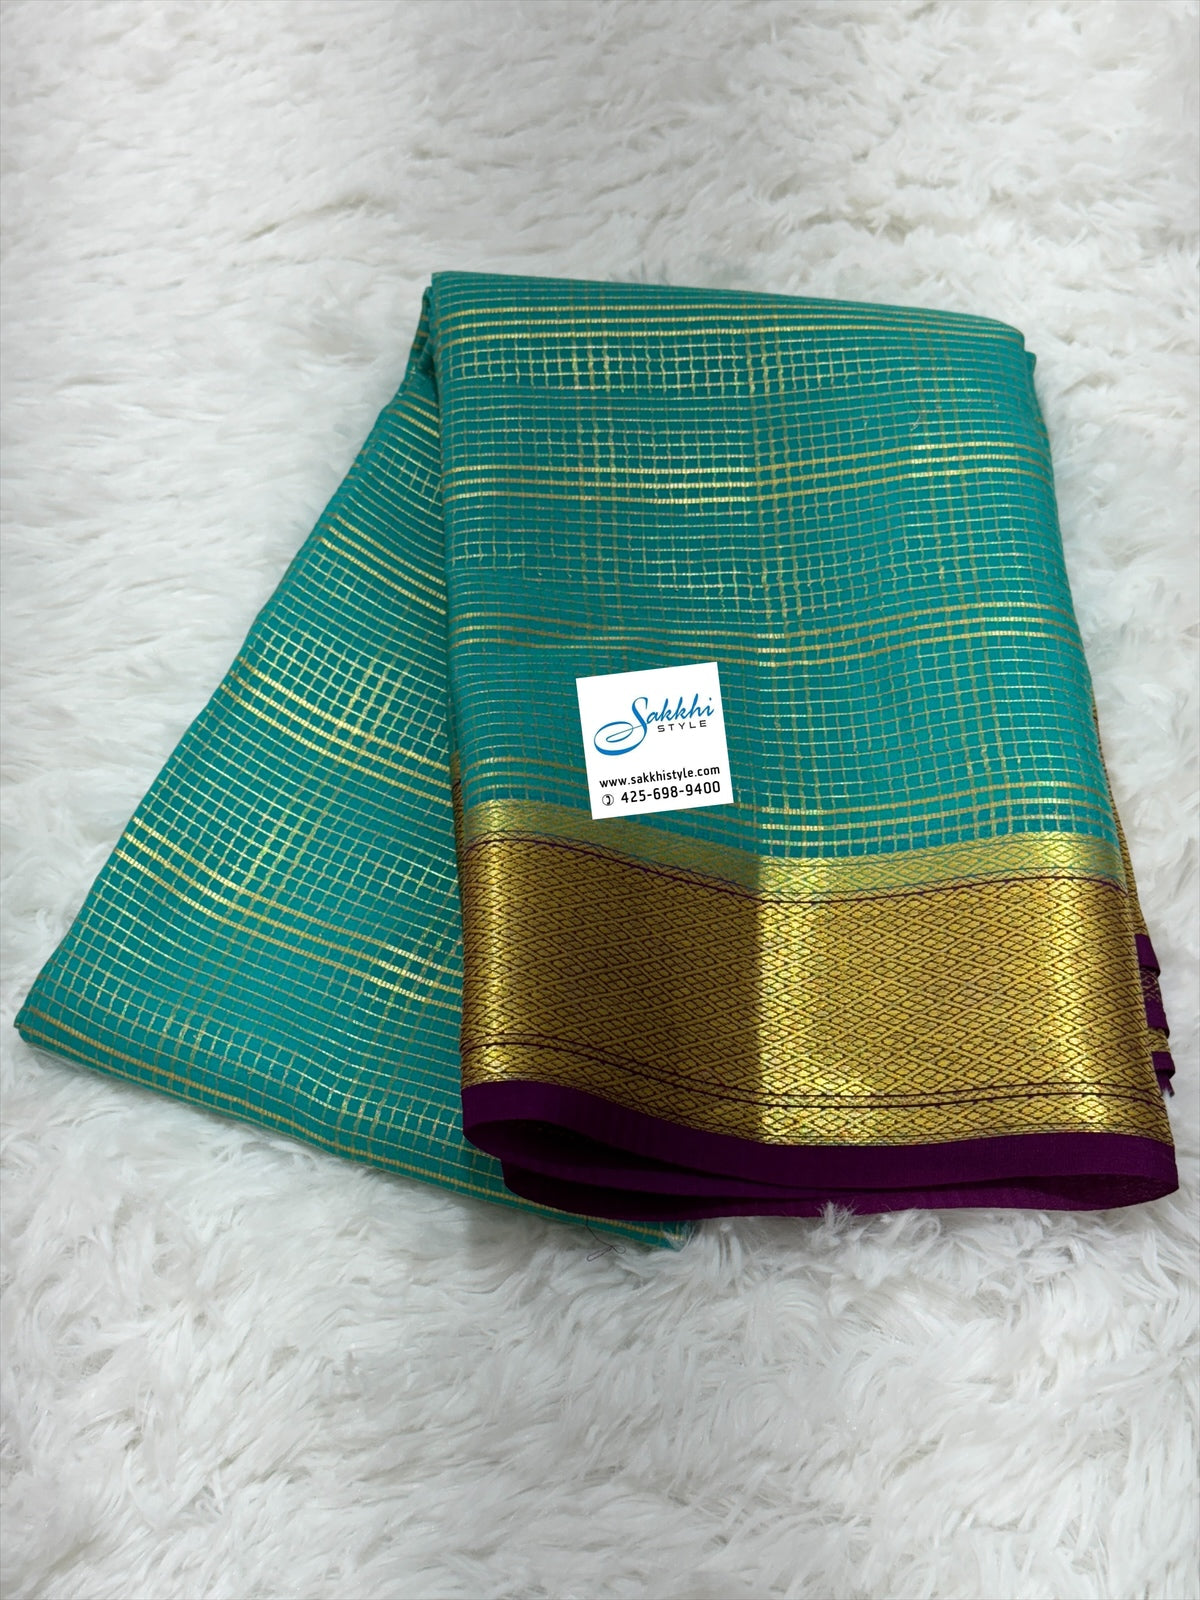 PURE MYSORE SILK SAREE IN BLEND OF TEAL BLUE AND PURPLE HUES